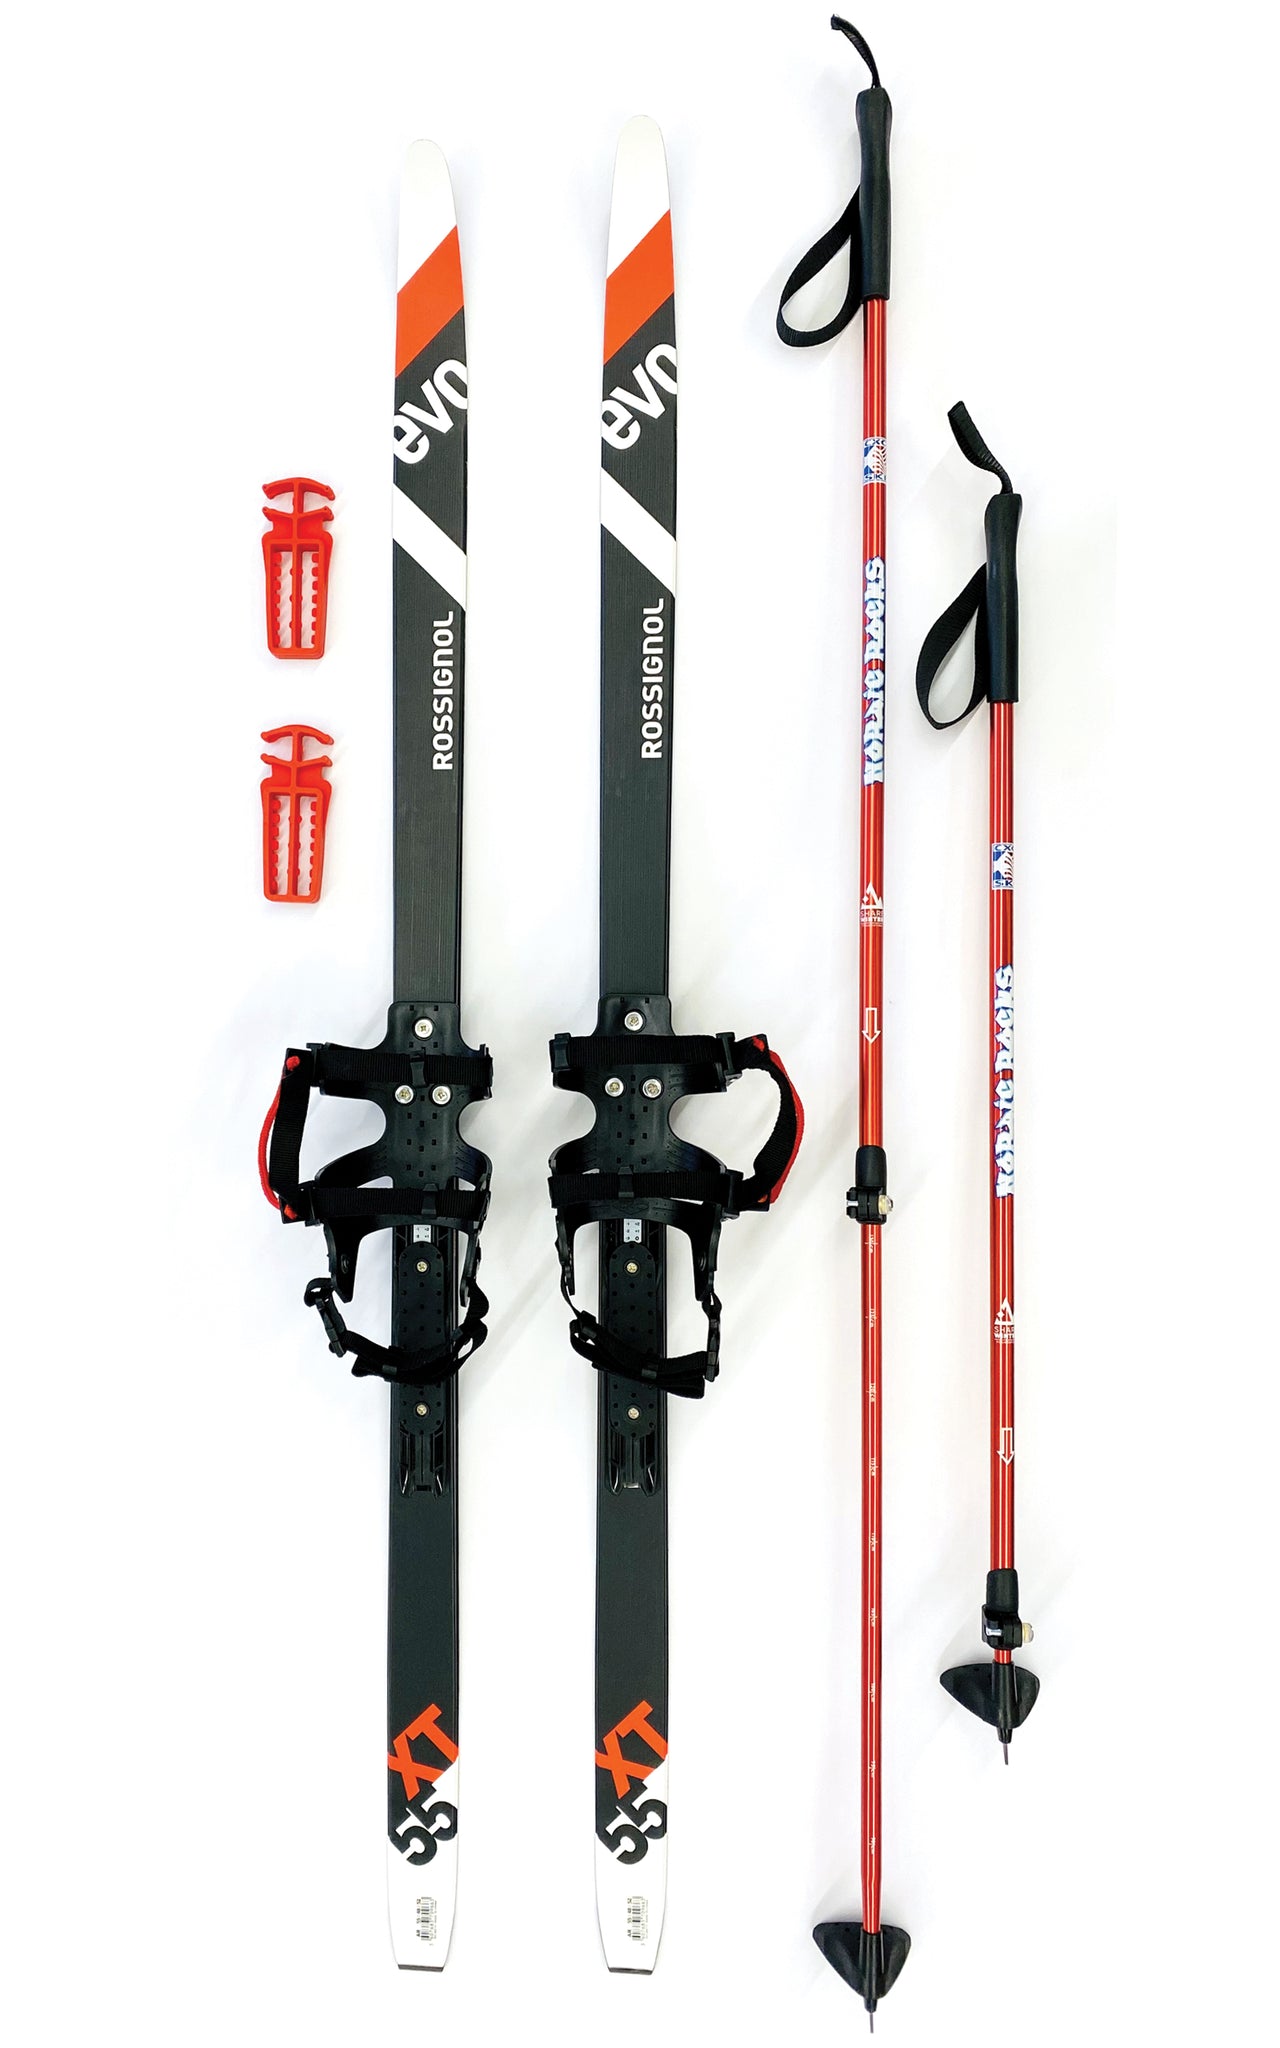 Nordic Rocks Cross-Country Ski Touring Ski Set - NO Ski Boots Required - Step-In Bindings - Poles